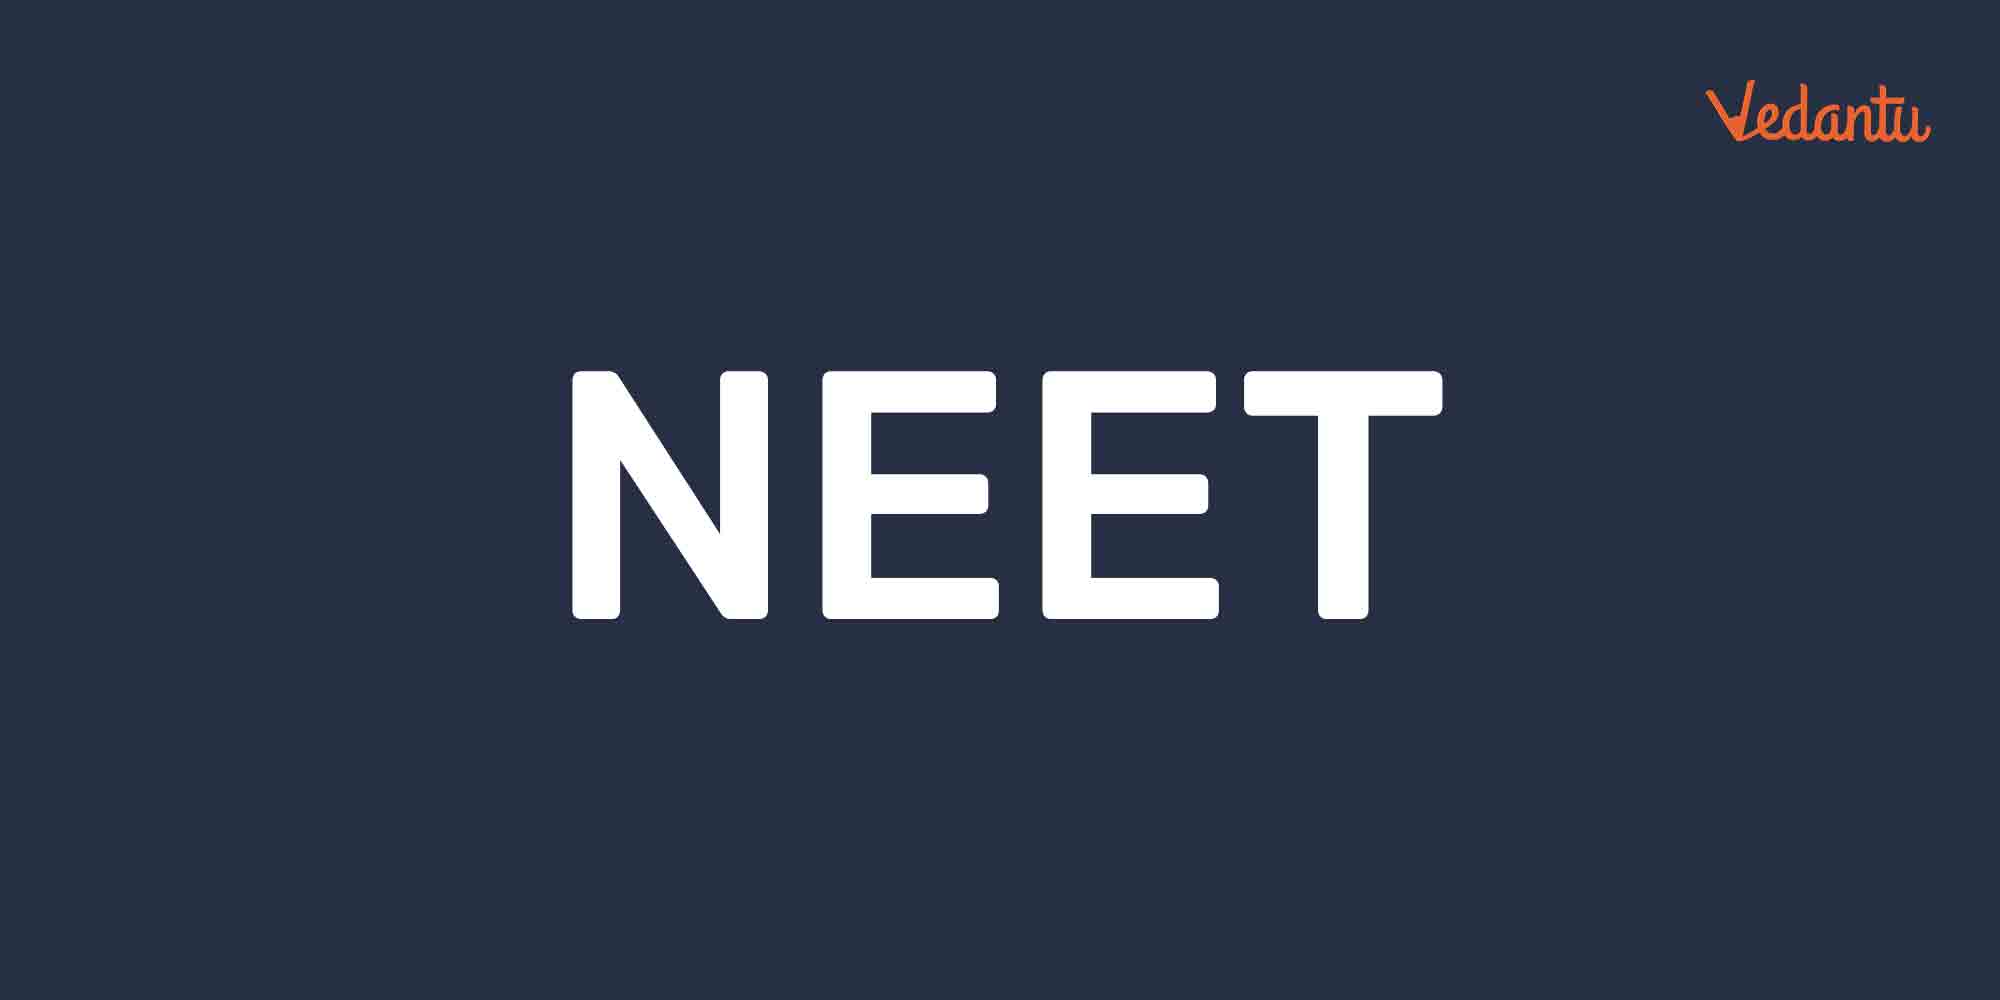 What are the Main Disadvantages of Merging Aiims and JIPMER With the NEET?